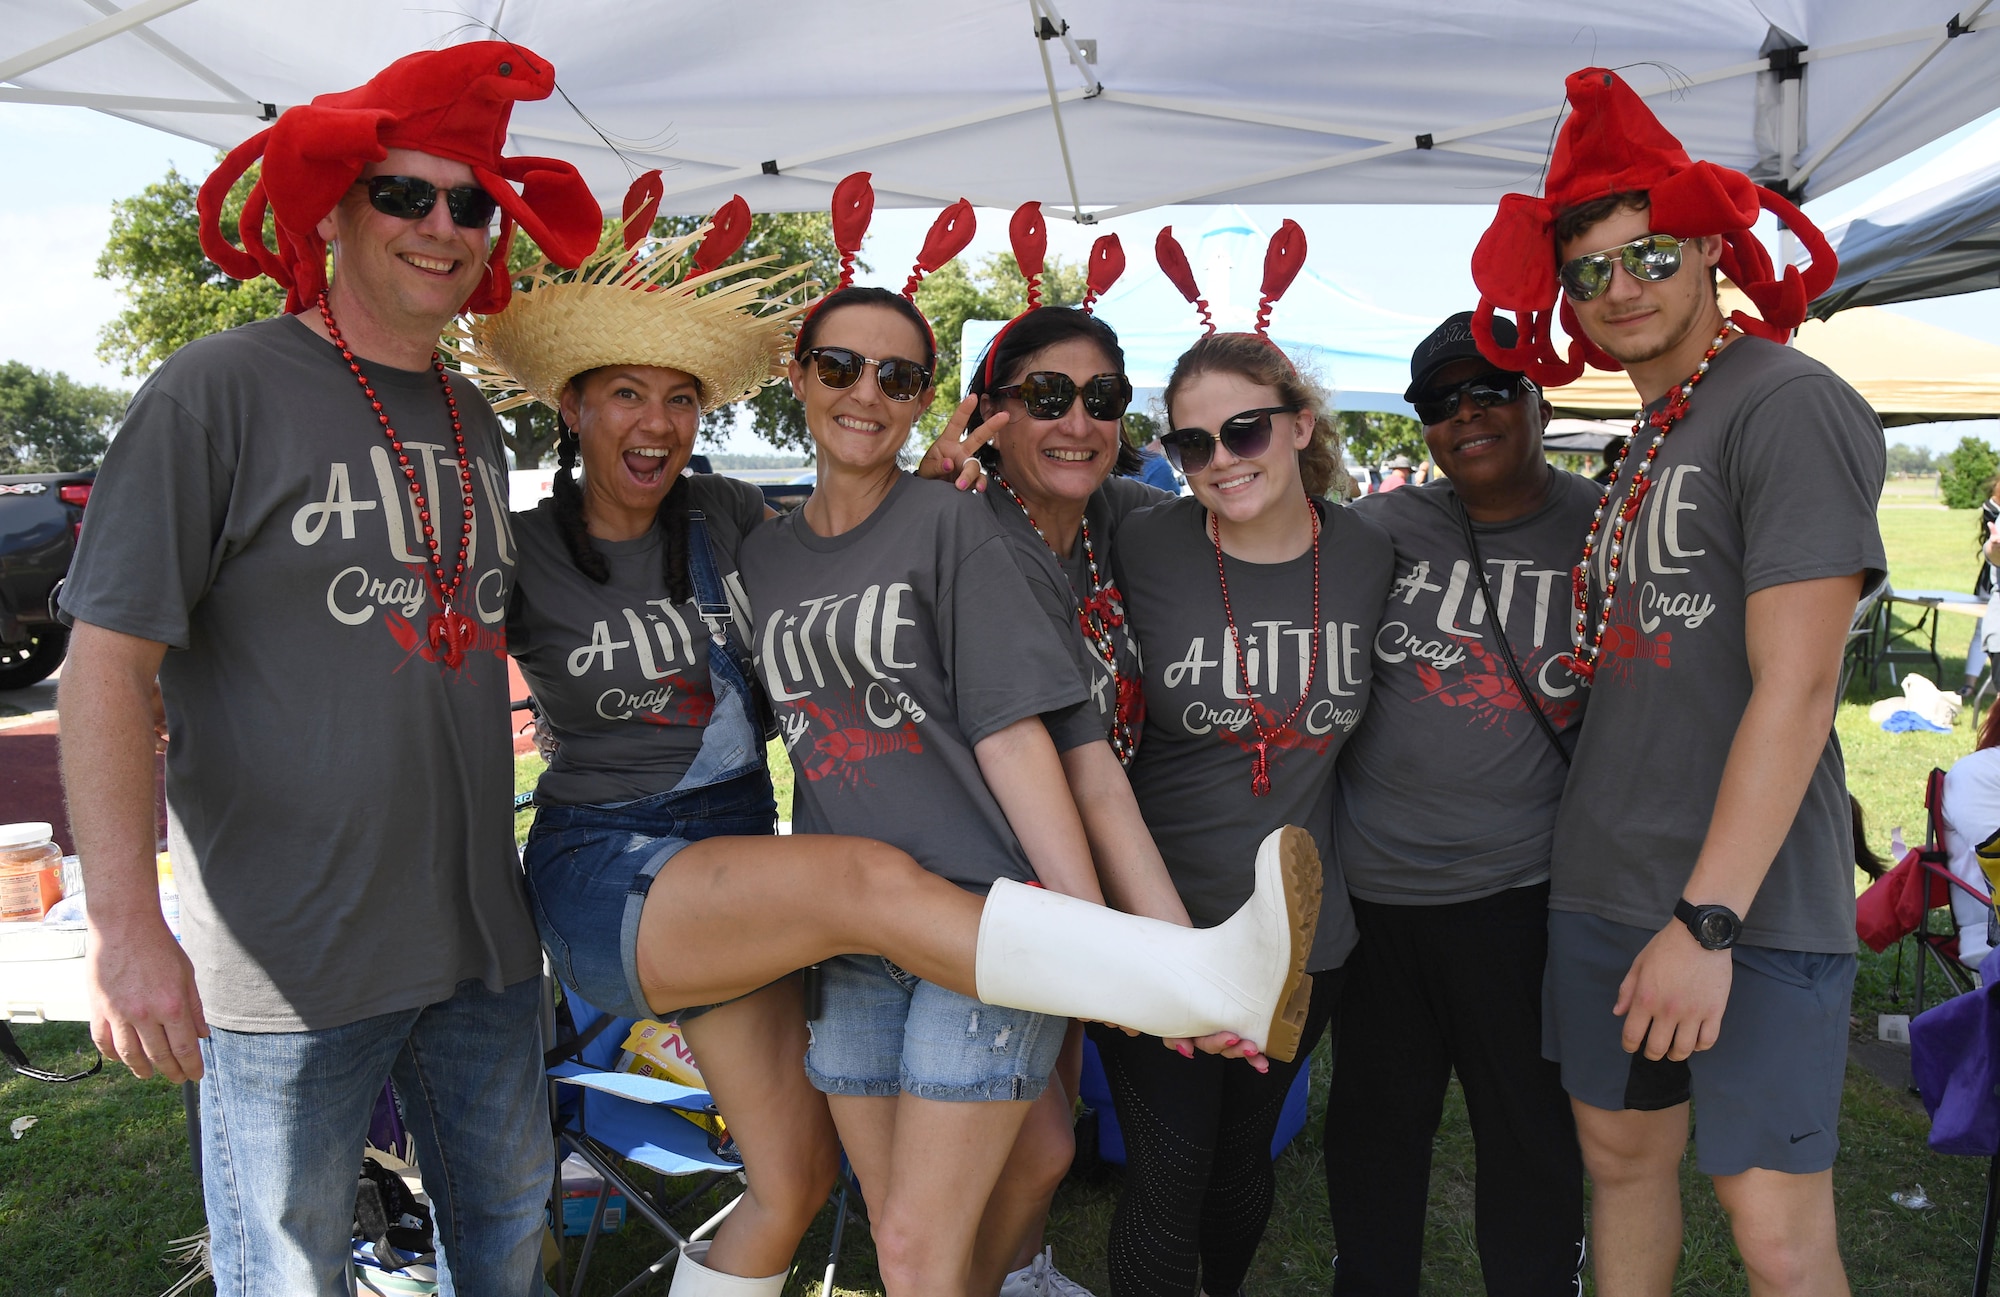 Members of the 81st Training Wing wing staff agency team, "A Little Cray Cray," pose for a photo during the 9th Annual Crawfish Cook-Off at the Bay Breeze Event Center at Keesler Air Force Base, Mississippi, June 11, 2021. Twelve teams competed in the event and more than 800 pounds of crawfish were distributed. (U.S. Air Force photo by Kemberly Groue)